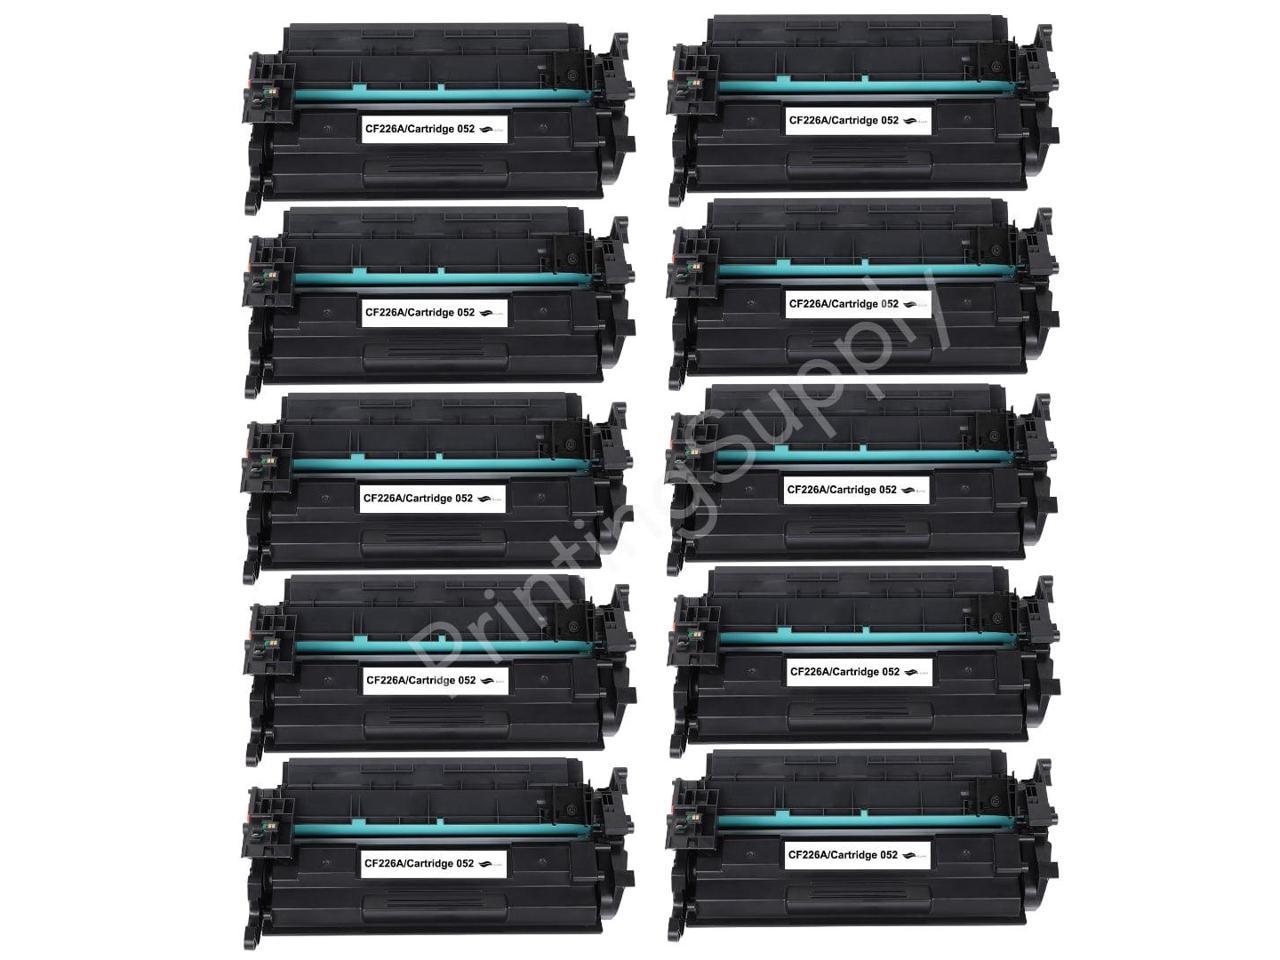 10 Pack New Compatible Toner Cartridge For HP CF226A 26A For Use With HP LaserJet Pro M402n M402dn M402dw M402d MFP M426fdw M426fdn M426dw